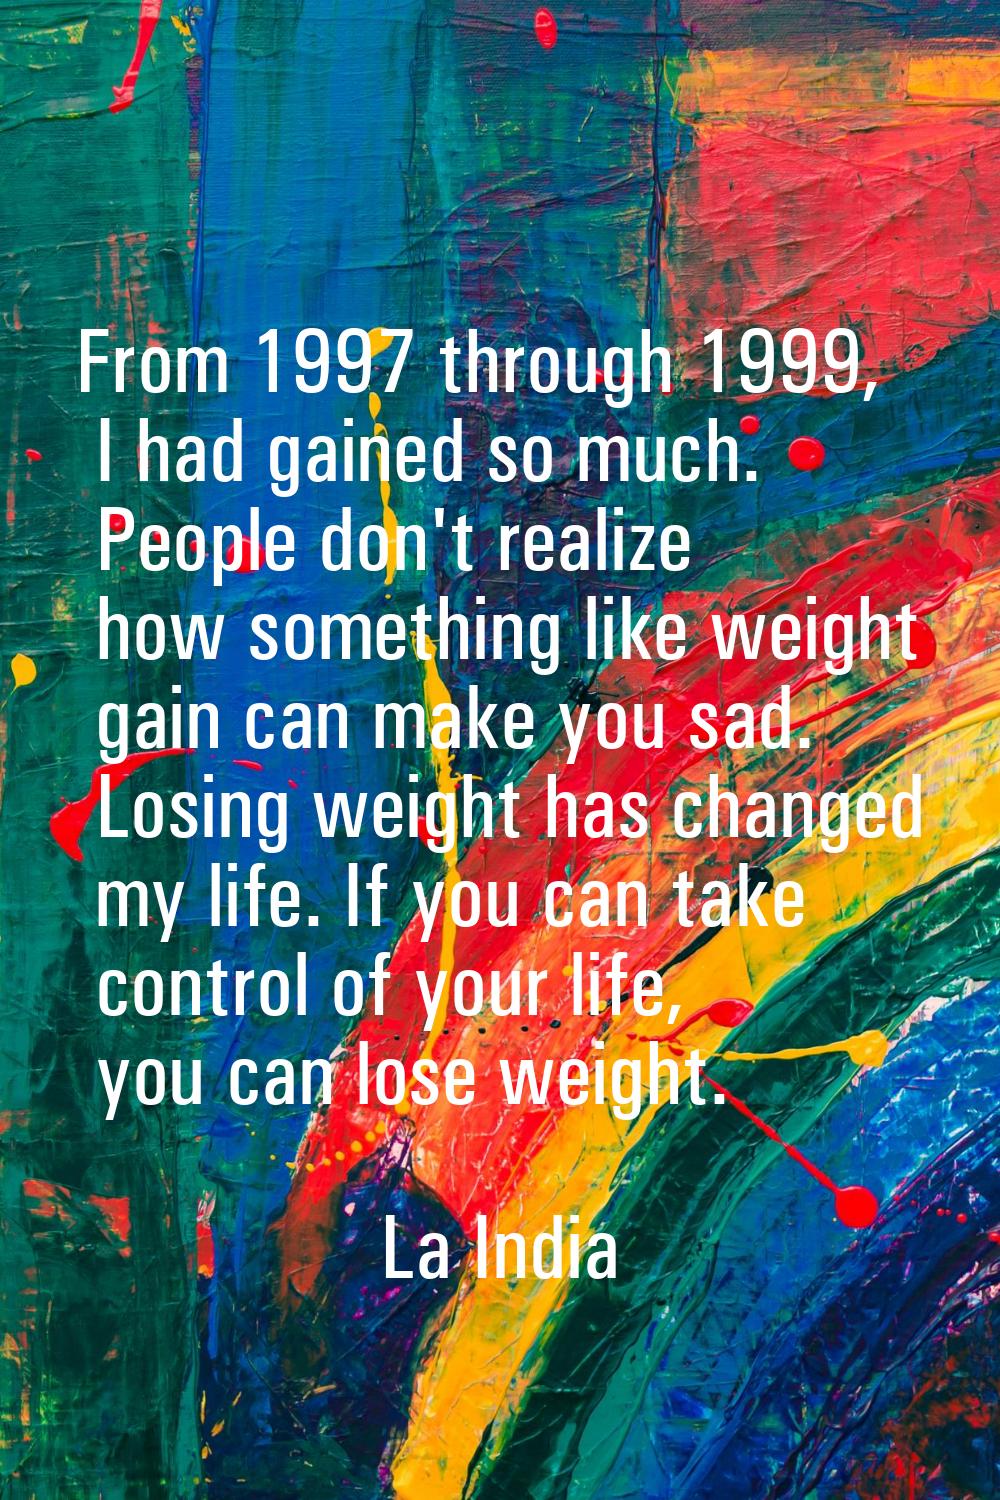 From 1997 through 1999, I had gained so much. People don't realize how something like weight gain c